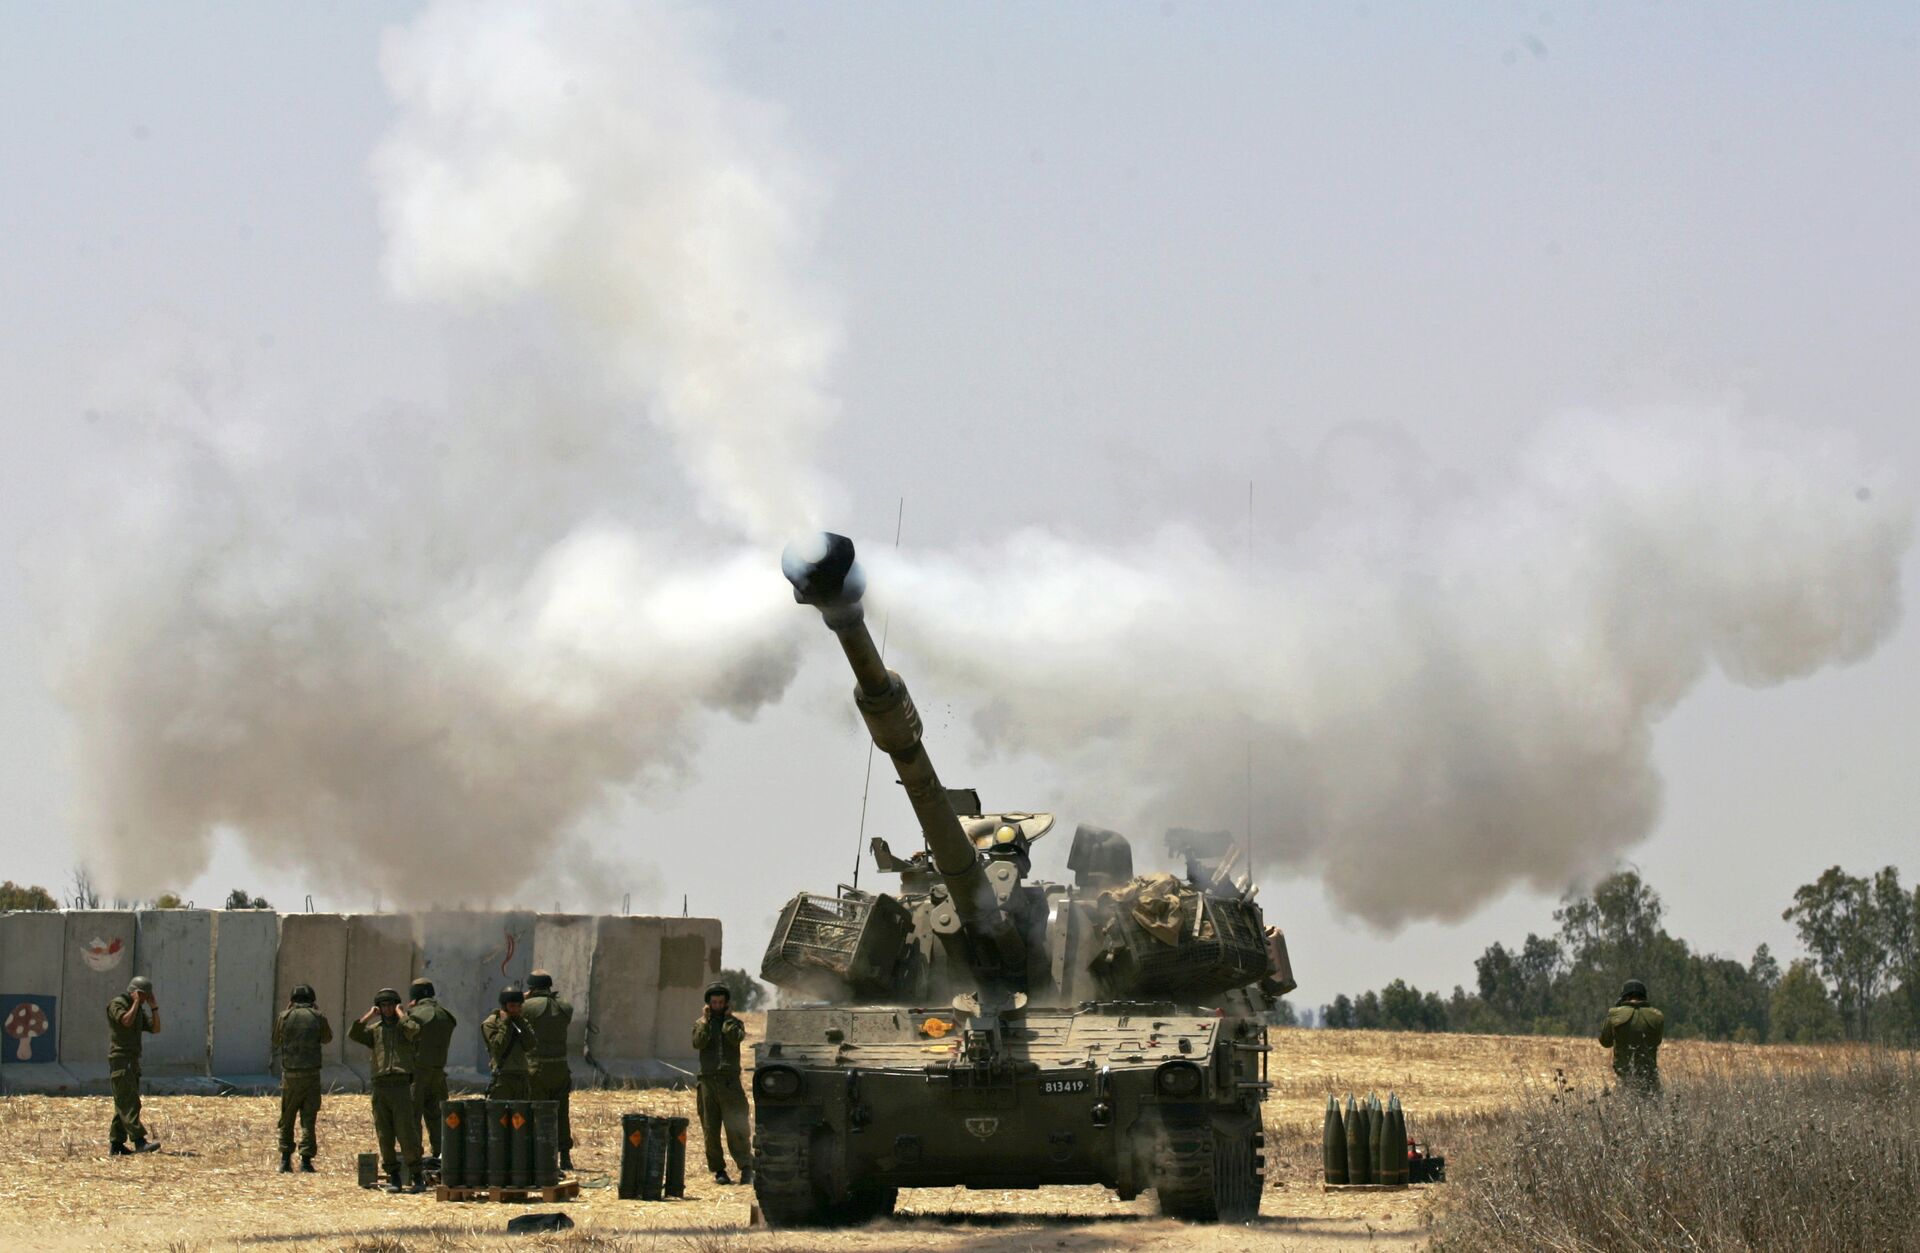 IDF Launches Massive Military Exercise to Simulate War on 'Multiple Fronts' Amid Flaring Tensions - Sputnik International, 1920, 09.05.2021